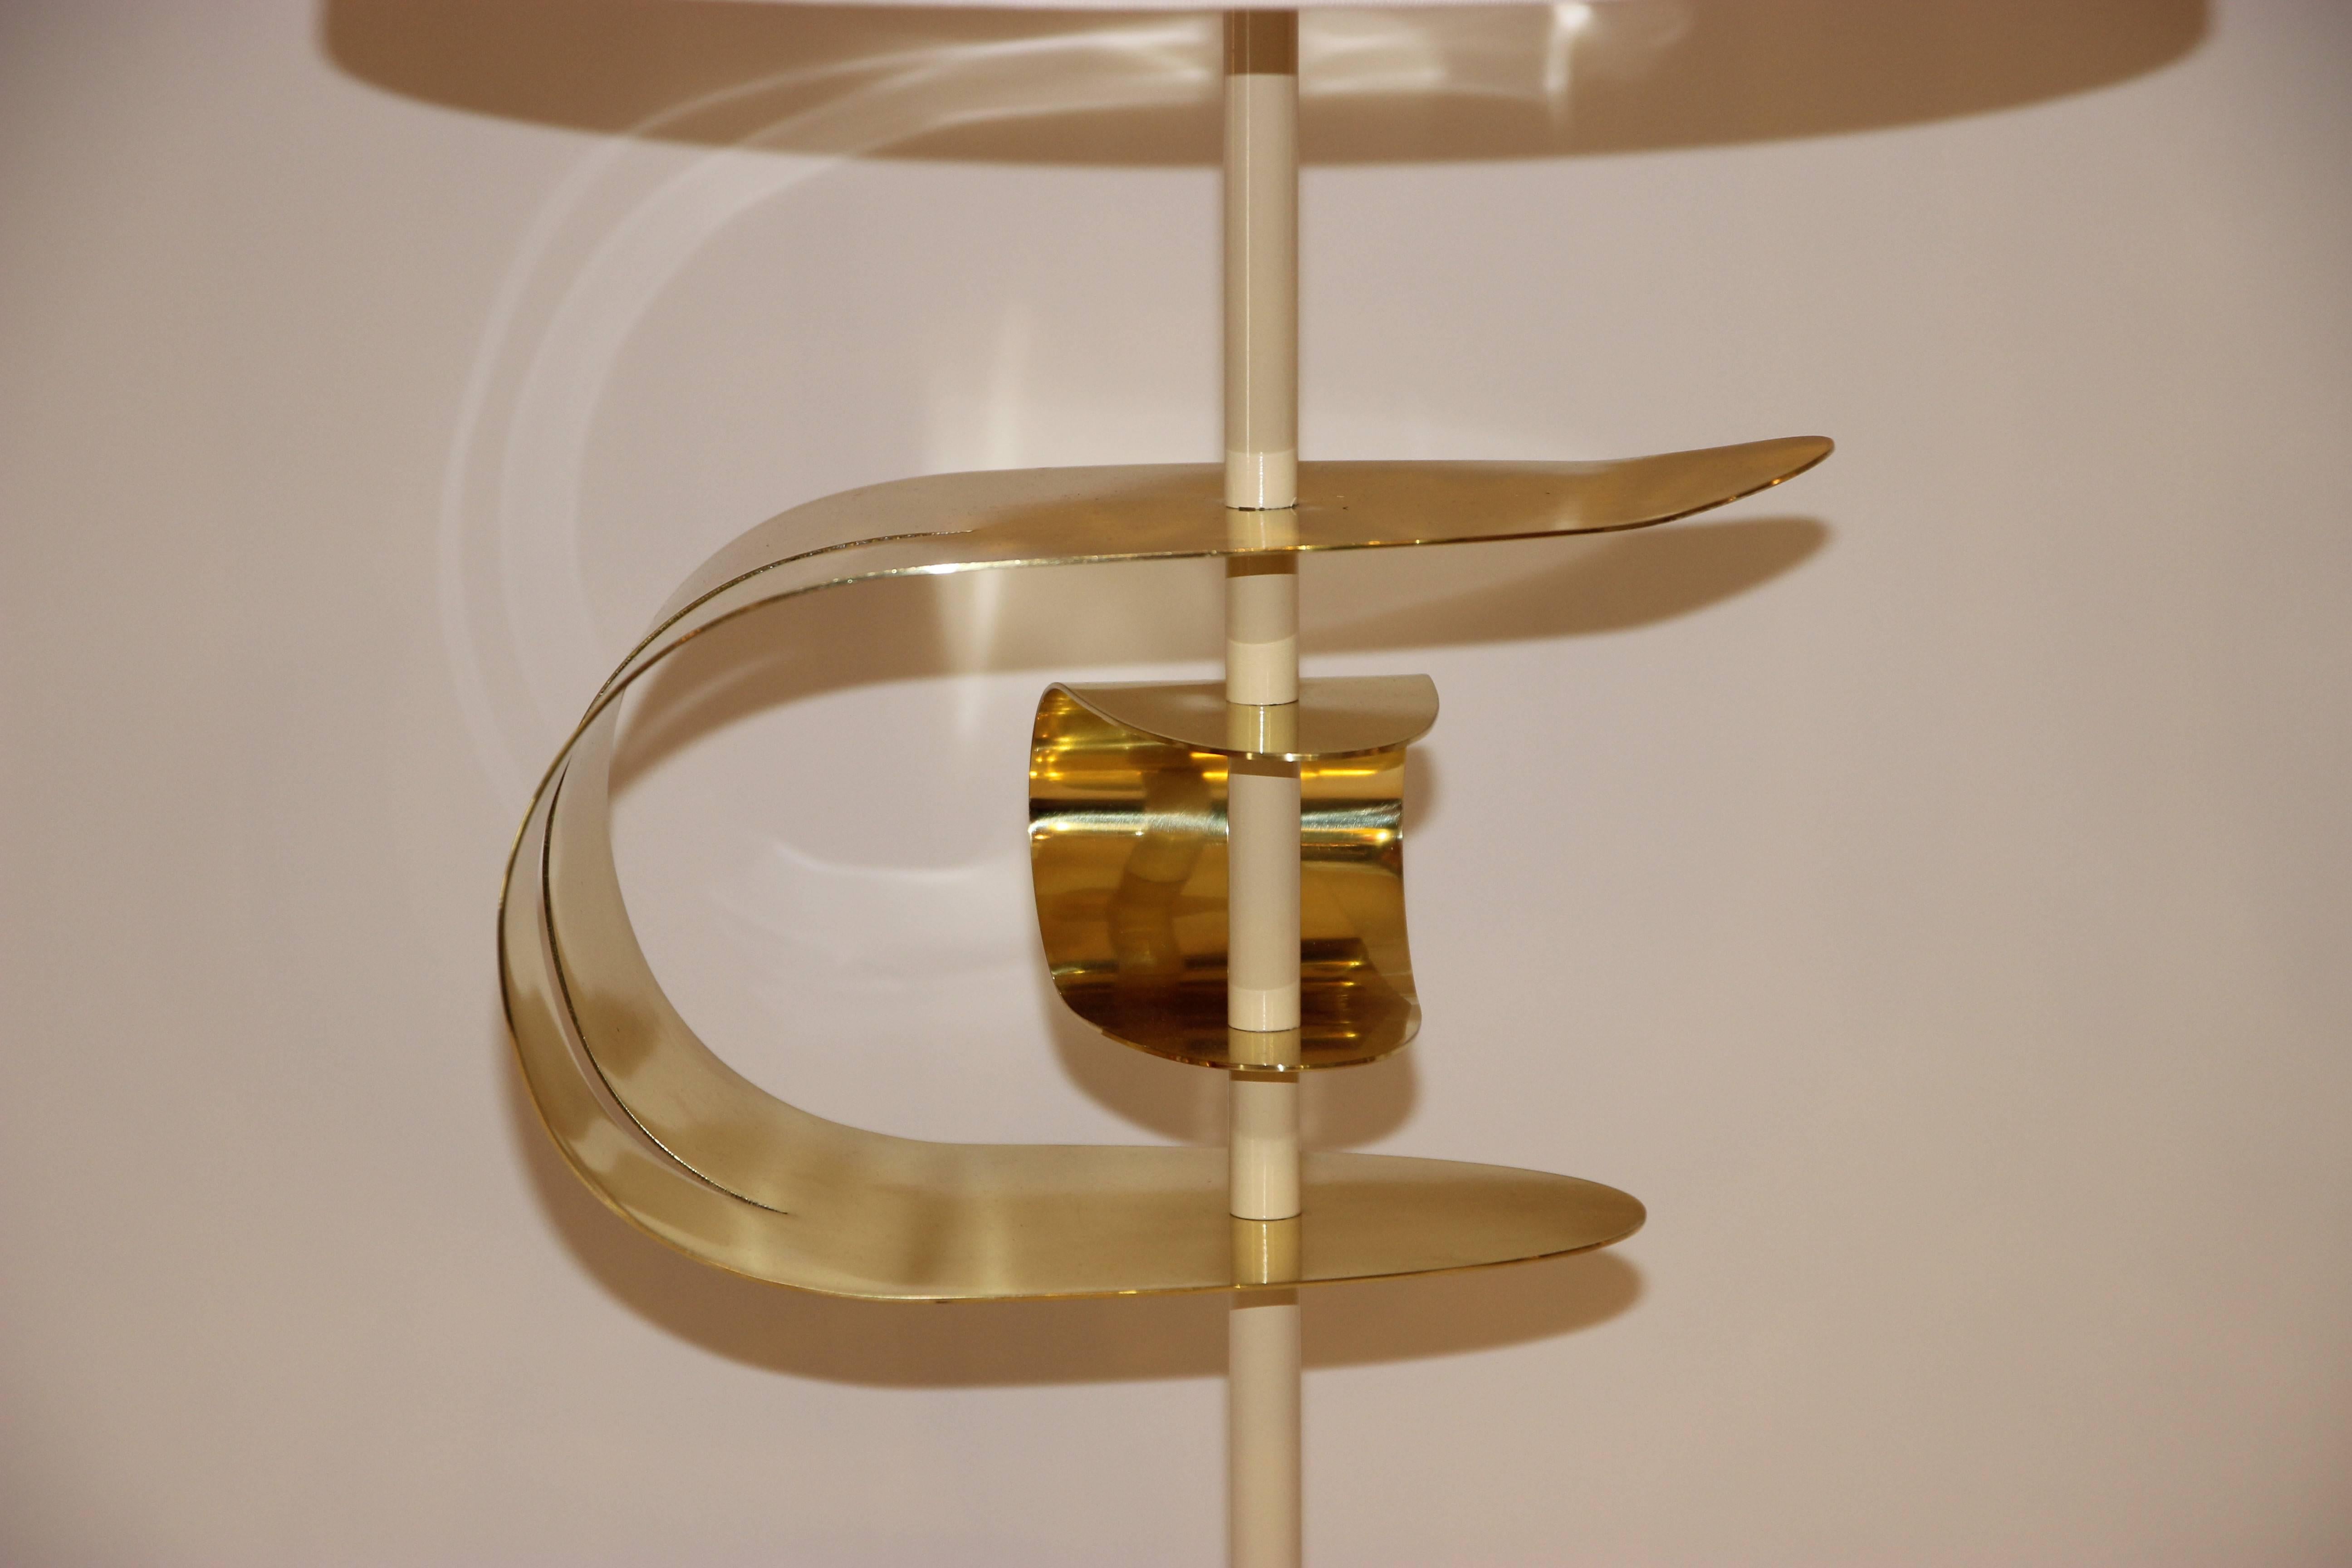 Angelo Brotto,
Pair of lamps, Esperie label,
Golden brass, lacquered metal and foot travertine,
Esperia edition, circa 2000, Italy.

Measures: Height 84 cm, width 12 cm, depth 13 cm.

Angelo Brotto (1914 - 2002) is an Italian artist and designer